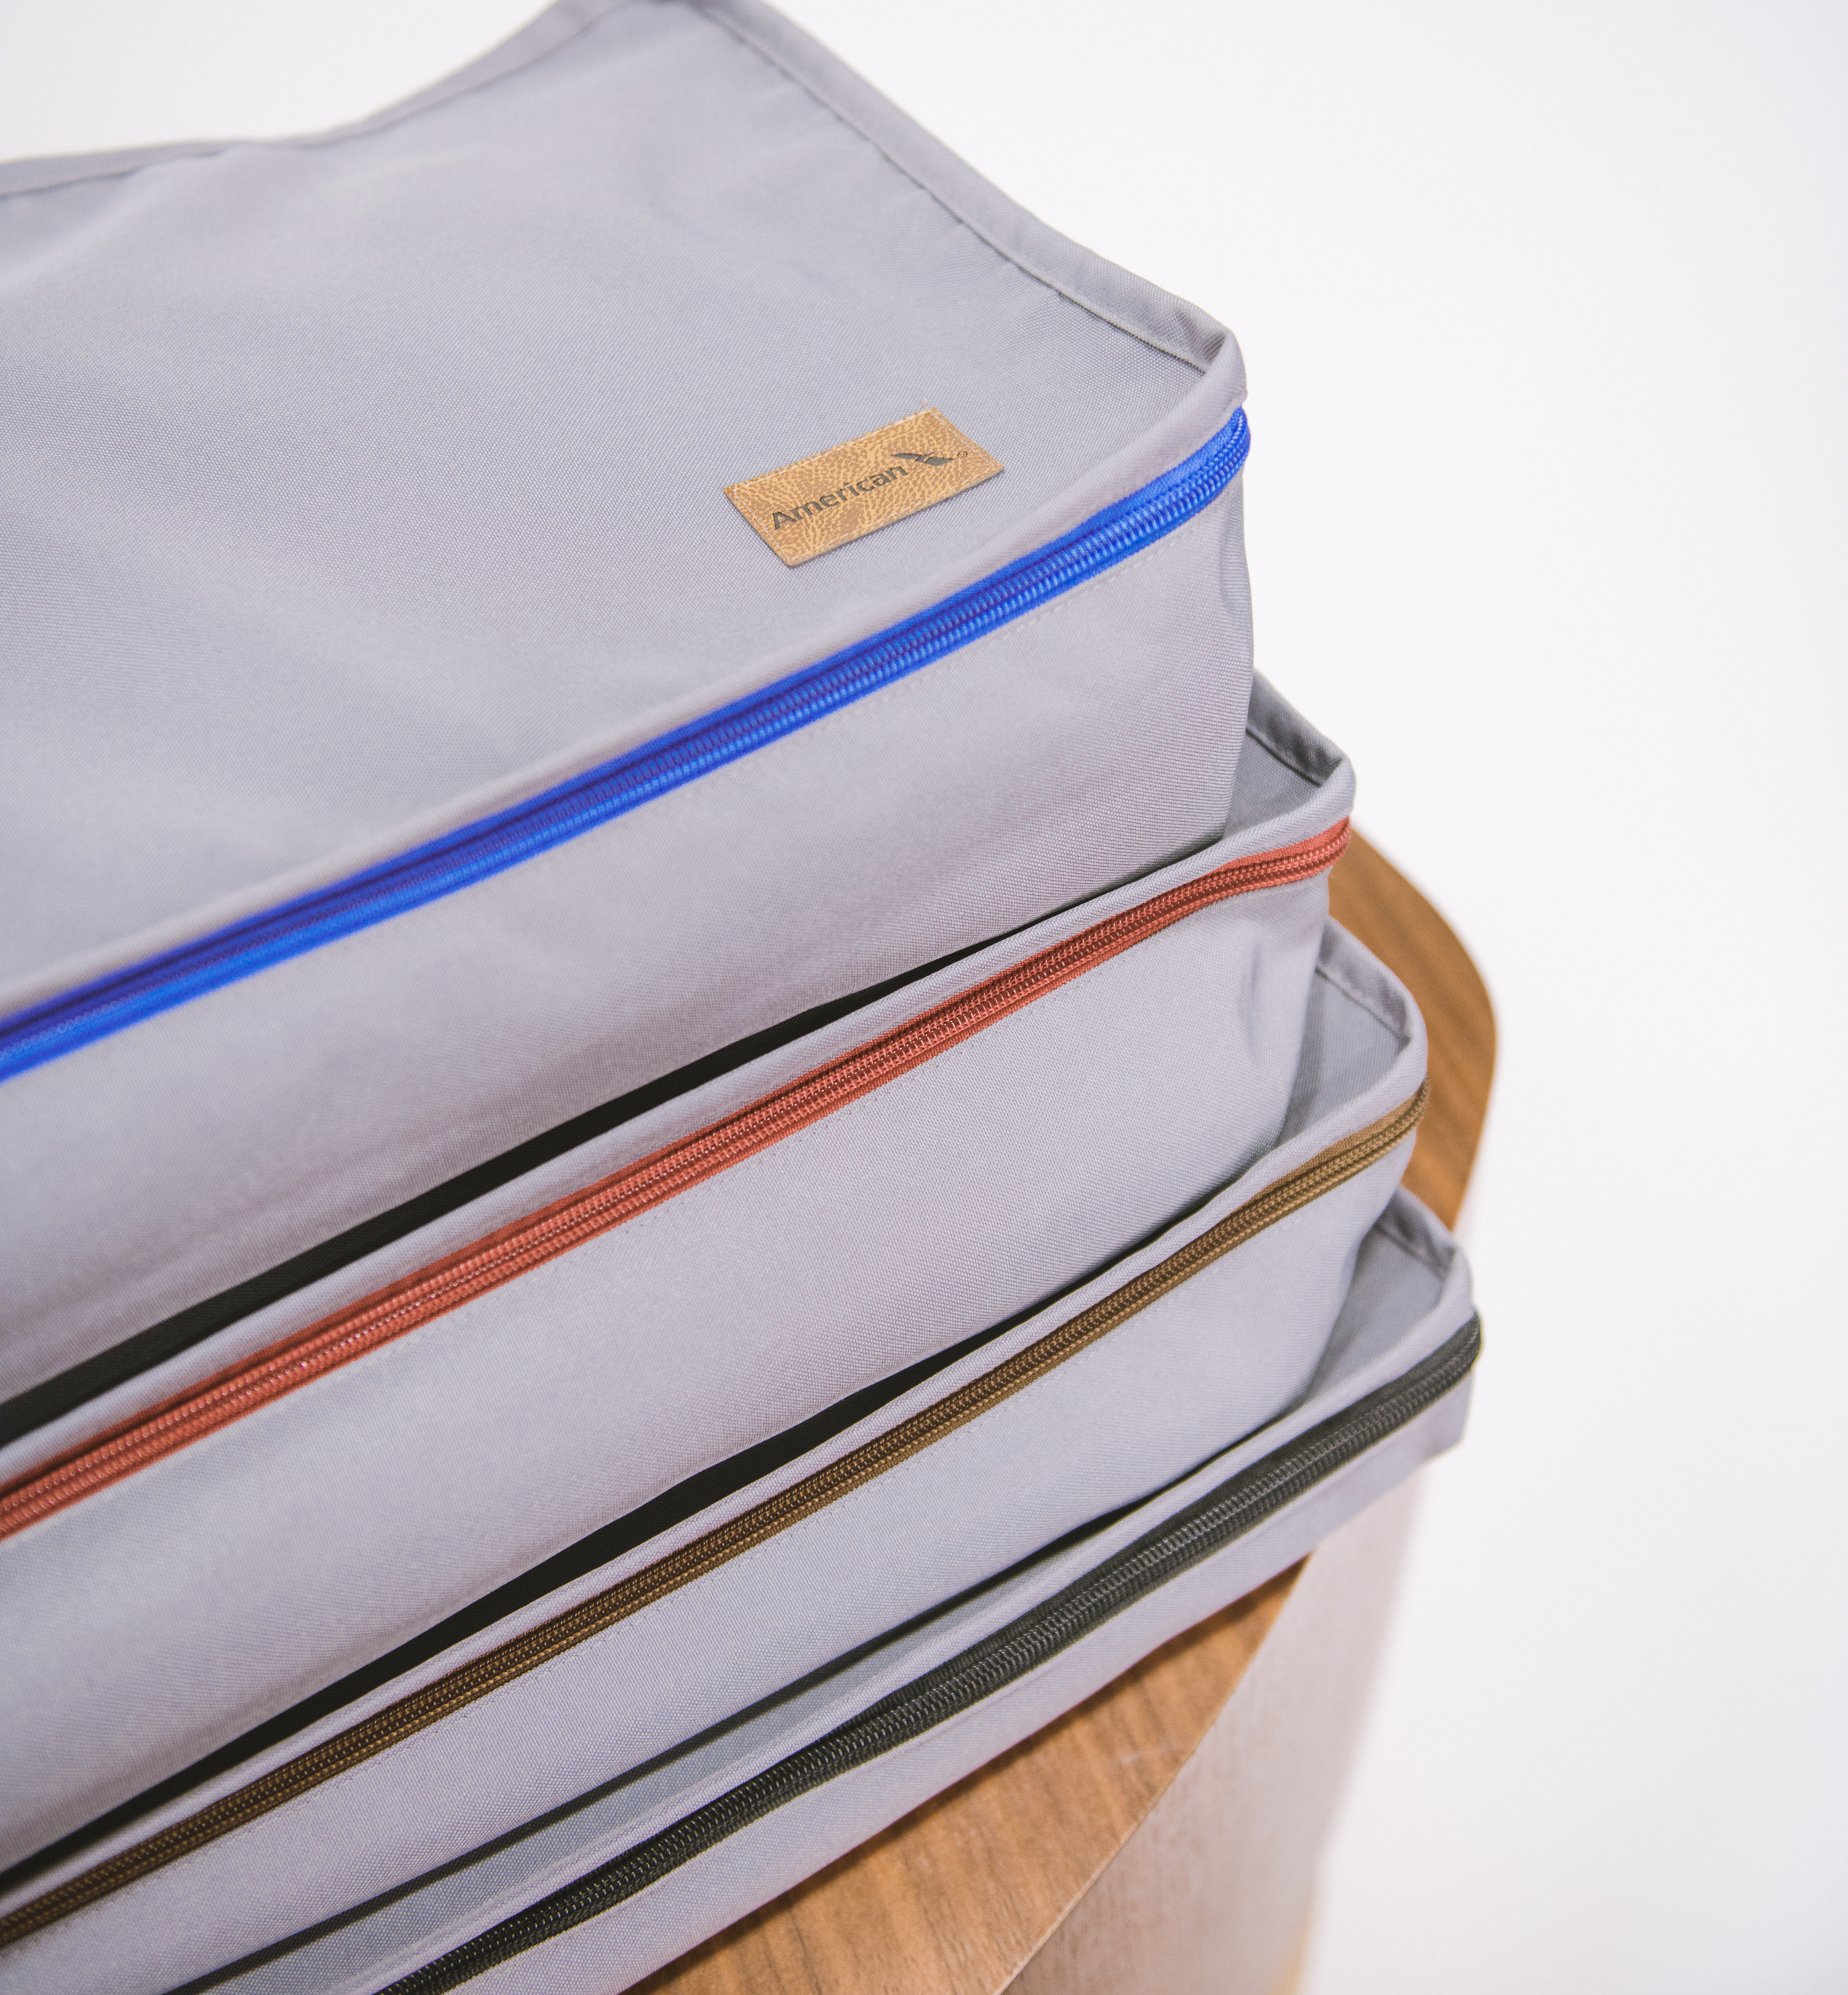 Reusable Zipper Product Bags - Travel News, Insights & Resources.